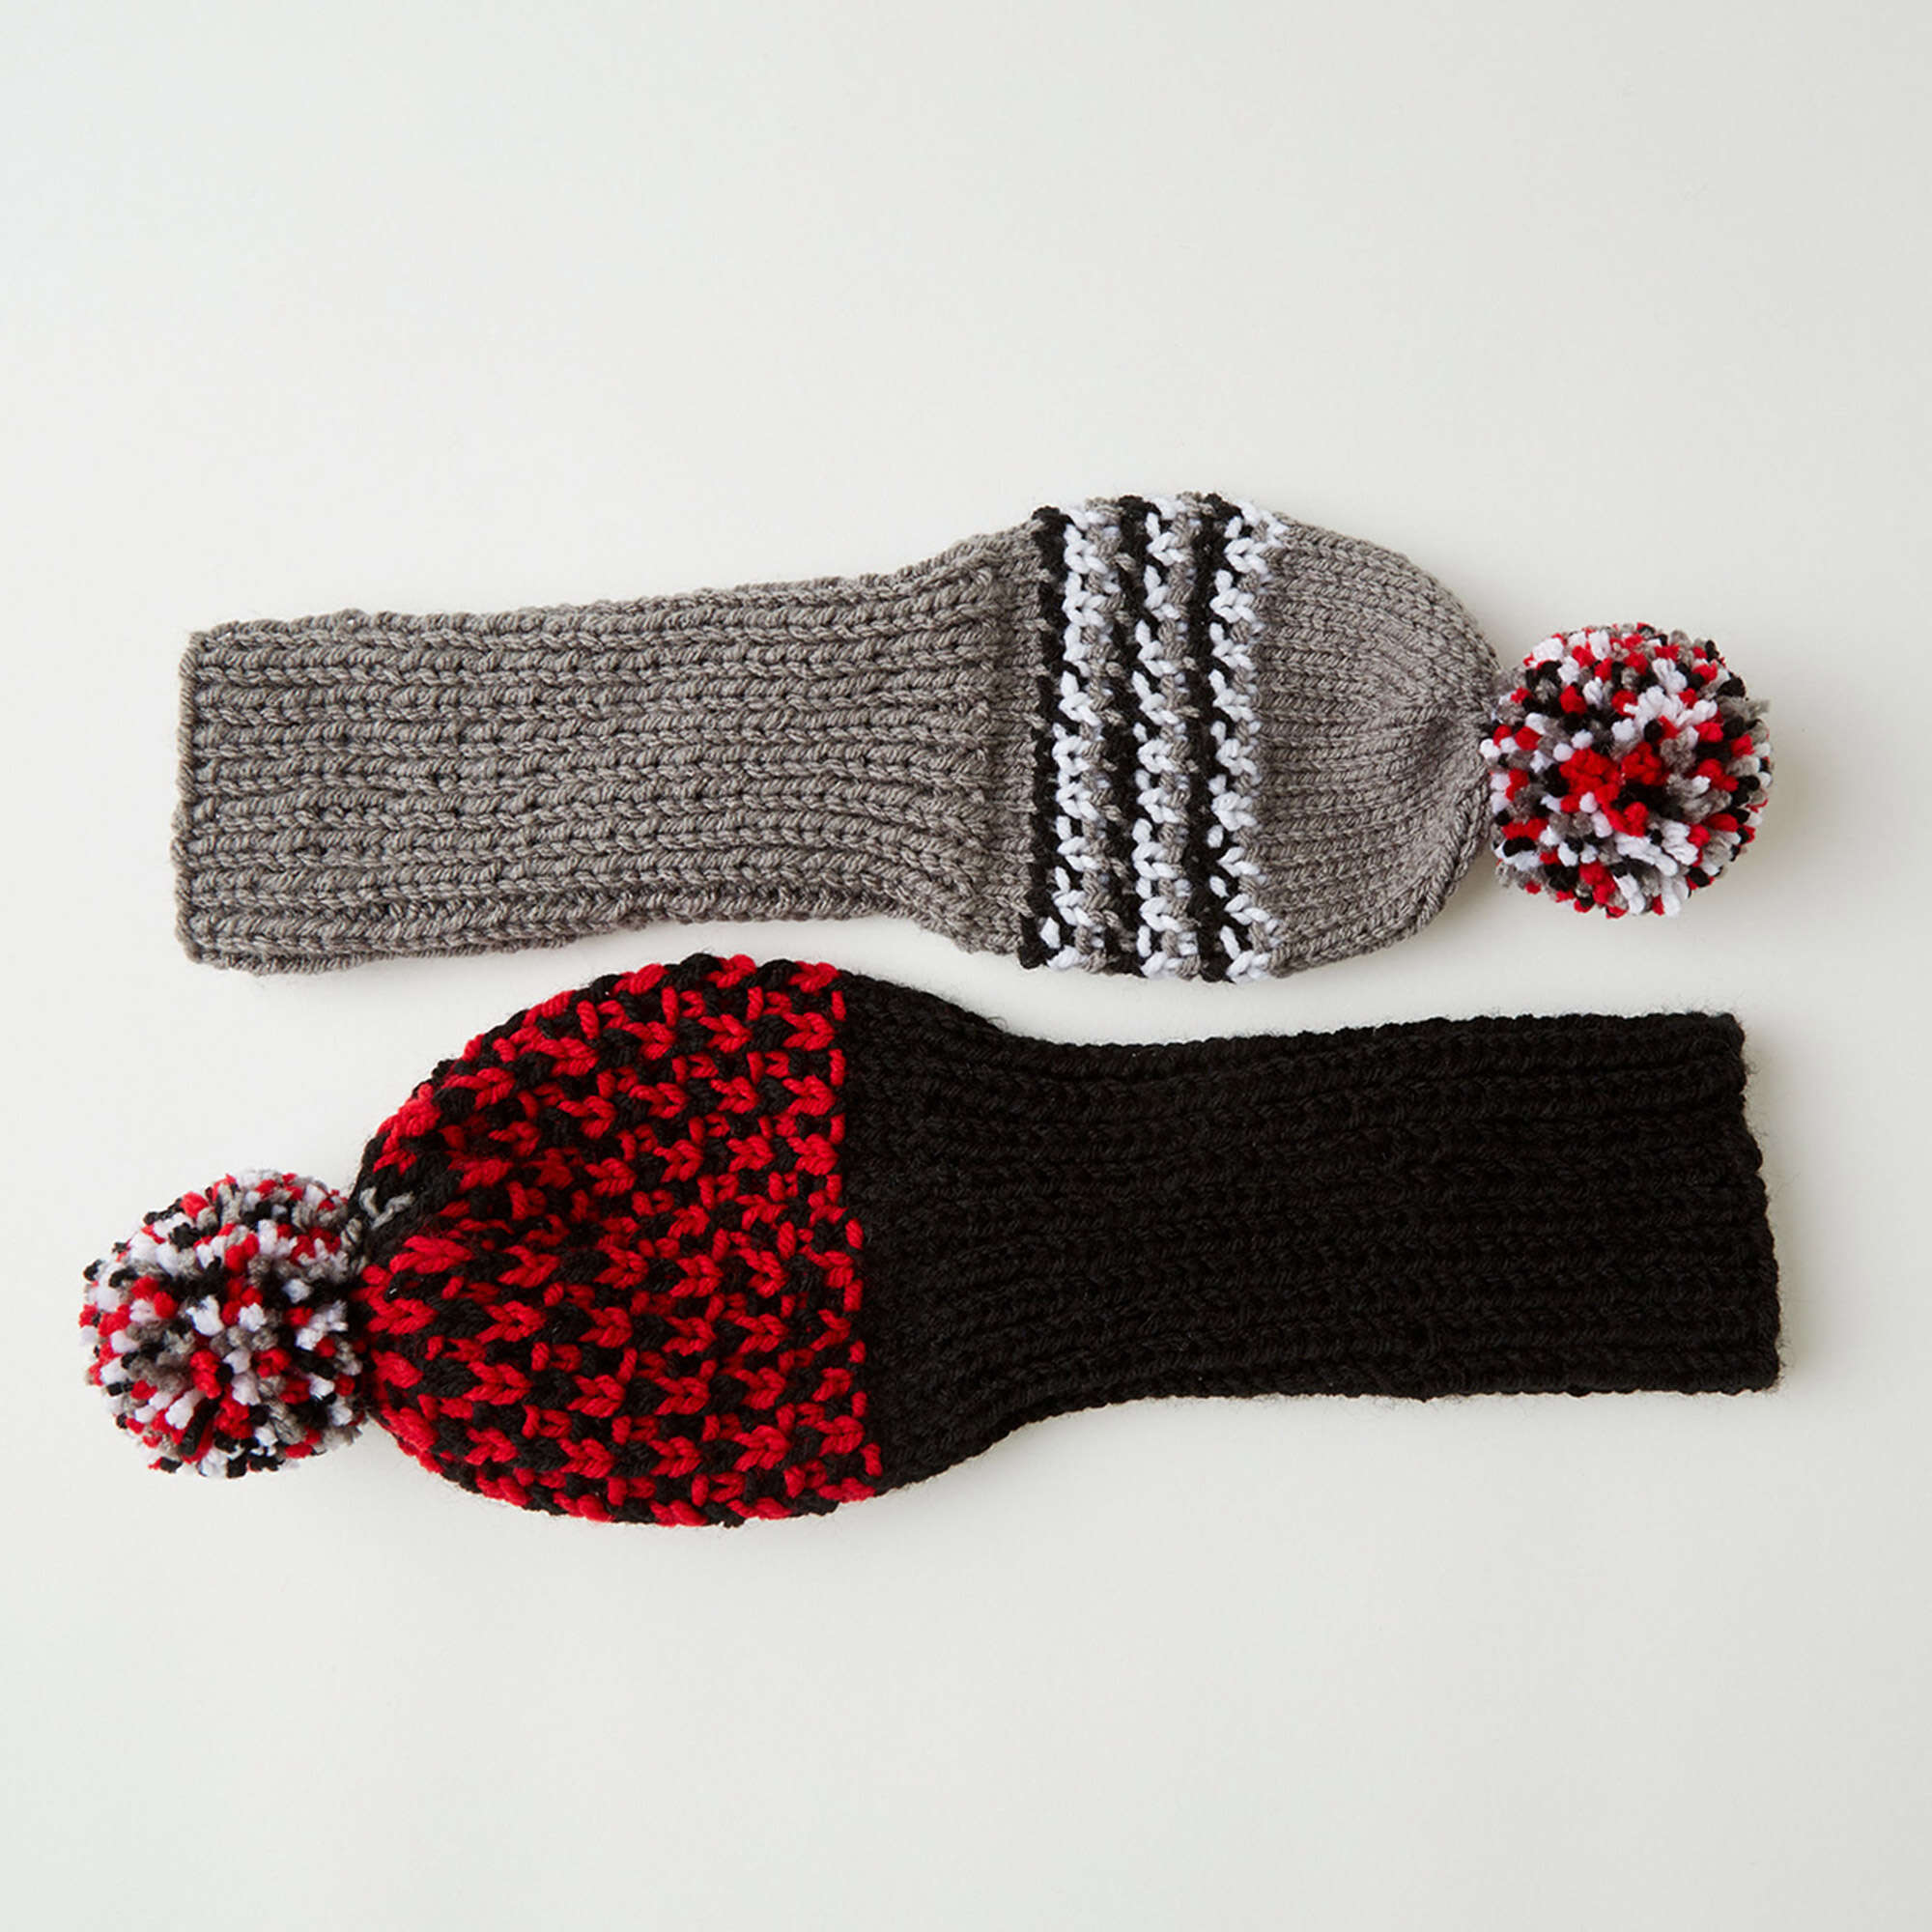 Red Heart Knit Golf Headcovers Pattern | Yarnspirations